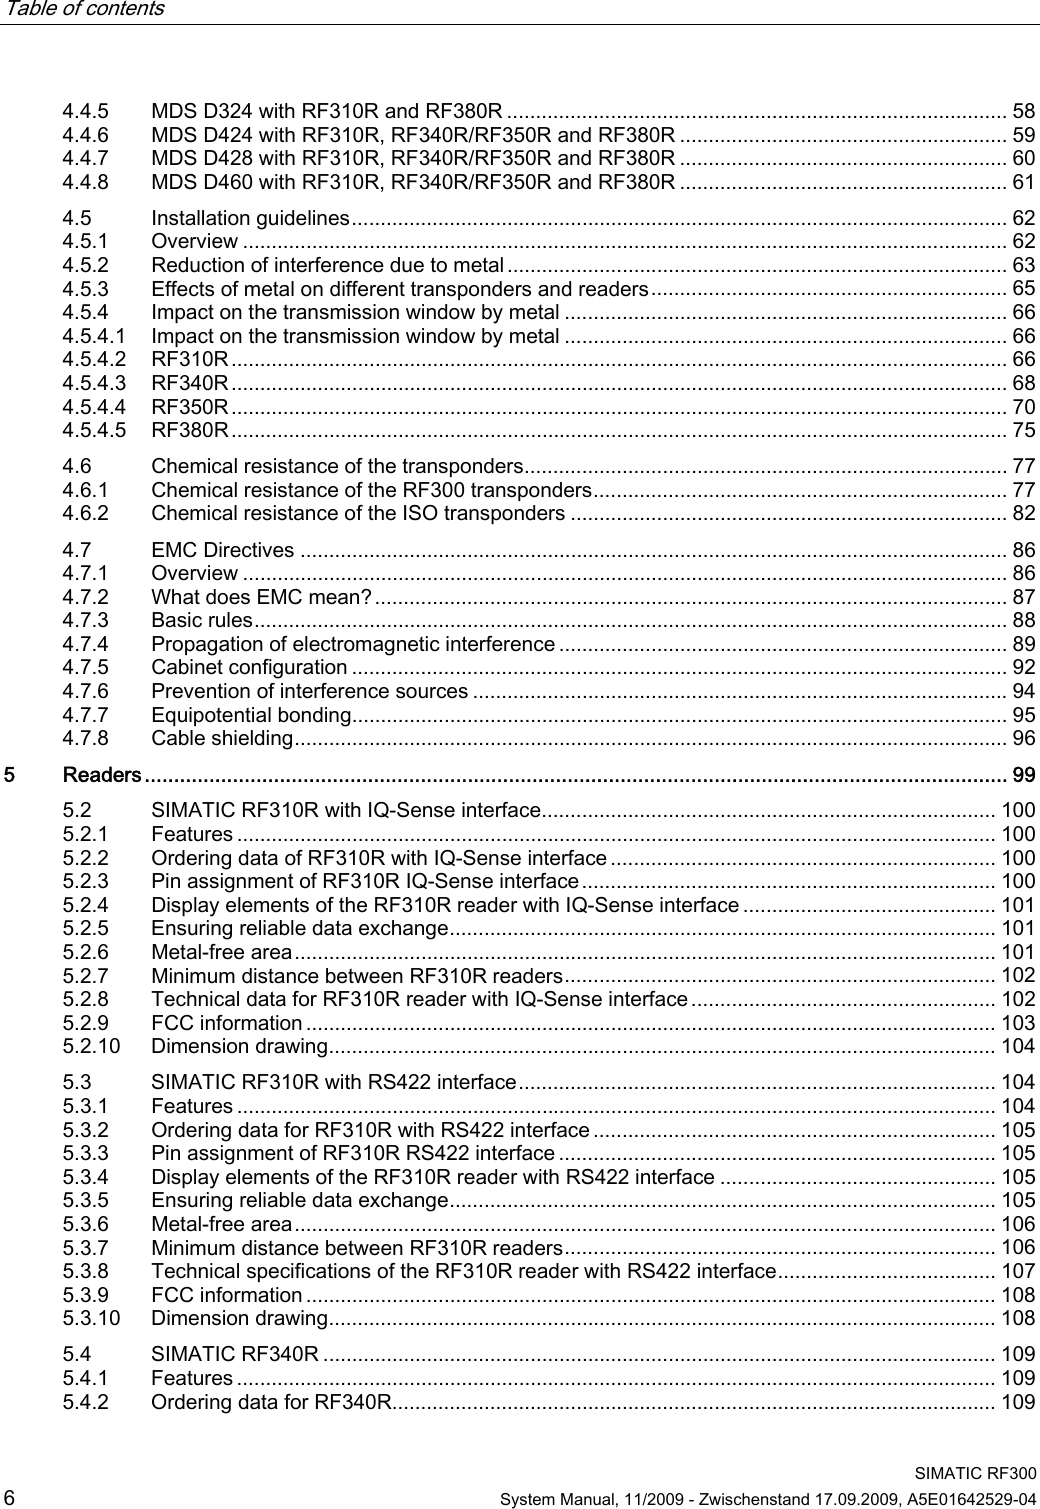 Table of contents      SIMATIC RF300 6  System Manual, 11/2009 - Zwischenstand 17.09.2009, A5E01642529-04 4.4.5  MDS D324 with RF310R and RF380R ....................................................................................... 58 4.4.6  MDS D424 with RF310R, RF340R/RF350R and RF380R ......................................................... 59 4.4.7  MDS D428 with RF310R, RF340R/RF350R and RF380R ......................................................... 60 4.4.8  MDS D460 with RF310R, RF340R/RF350R and RF380R ......................................................... 61 4.5  Installation guidelines.................................................................................................................. 62 4.5.1  Overview ..................................................................................................................................... 62 4.5.2  Reduction of interference due to metal ....................................................................................... 63 4.5.3  Effects of metal on different transponders and readers.............................................................. 65 4.5.4  Impact on the transmission window by metal ............................................................................. 66 4.5.4.1  Impact on the transmission window by metal ............................................................................. 66 4.5.4.2  RF310R....................................................................................................................................... 66 4.5.4.3  RF340R....................................................................................................................................... 68 4.5.4.4  RF350R....................................................................................................................................... 70 4.5.4.5  RF380R....................................................................................................................................... 75 4.6  Chemical resistance of the transponders.................................................................................... 77 4.6.1  Chemical resistance of the RF300 transponders........................................................................ 77 4.6.2  Chemical resistance of the ISO transponders ............................................................................ 82 4.7  EMC Directives ........................................................................................................................... 86 4.7.1  Overview ..................................................................................................................................... 86 4.7.2  What does EMC mean?.............................................................................................................. 87 4.7.3  Basic rules................................................................................................................................... 88 4.7.4  Propagation of electromagnetic interference .............................................................................. 89 4.7.5  Cabinet configuration .................................................................................................................. 92 4.7.6  Prevention of interference sources .............................................................................................94 4.7.7  Equipotential bonding.................................................................................................................. 95 4.7.8  Cable shielding............................................................................................................................ 96 5  Readers................................................................................................................................................... 99 5.2  SIMATIC RF310R with IQ-Sense interface............................................................................... 100 5.2.1  Features .................................................................................................................................... 100 5.2.2  Ordering data of RF310R with IQ-Sense interface ................................................................... 100 5.2.3  Pin assignment of RF310R IQ-Sense interface........................................................................ 100 5.2.4  Display elements of the RF310R reader with IQ-Sense interface ............................................ 101 5.2.5  Ensuring reliable data exchange............................................................................................... 101 5.2.6  Metal-free area.......................................................................................................................... 101 5.2.7  Minimum distance between RF310R readers........................................................................... 102 5.2.8  Technical data for RF310R reader with IQ-Sense interface..................................................... 102 5.2.9  FCC information ........................................................................................................................ 103 5.2.10  Dimension drawing.................................................................................................................... 104 5.3  SIMATIC RF310R with RS422 interface................................................................................... 104 5.3.1  Features .................................................................................................................................... 104 5.3.2  Ordering data for RF310R with RS422 interface ...................................................................... 105 5.3.3  Pin assignment of RF310R RS422 interface ............................................................................ 105 5.3.4  Display elements of the RF310R reader with RS422 interface ................................................ 105 5.3.5  Ensuring reliable data exchange............................................................................................... 105 5.3.6  Metal-free area.......................................................................................................................... 106 5.3.7  Minimum distance between RF310R readers........................................................................... 106 5.3.8  Technical specifications of the RF310R reader with RS422 interface...................................... 107 5.3.9  FCC information ........................................................................................................................ 108 5.3.10  Dimension drawing.................................................................................................................... 108 5.4  SIMATIC RF340R ..................................................................................................................... 109 5.4.1  Features .................................................................................................................................... 109 5.4.2  Ordering data for RF340R......................................................................................................... 109 